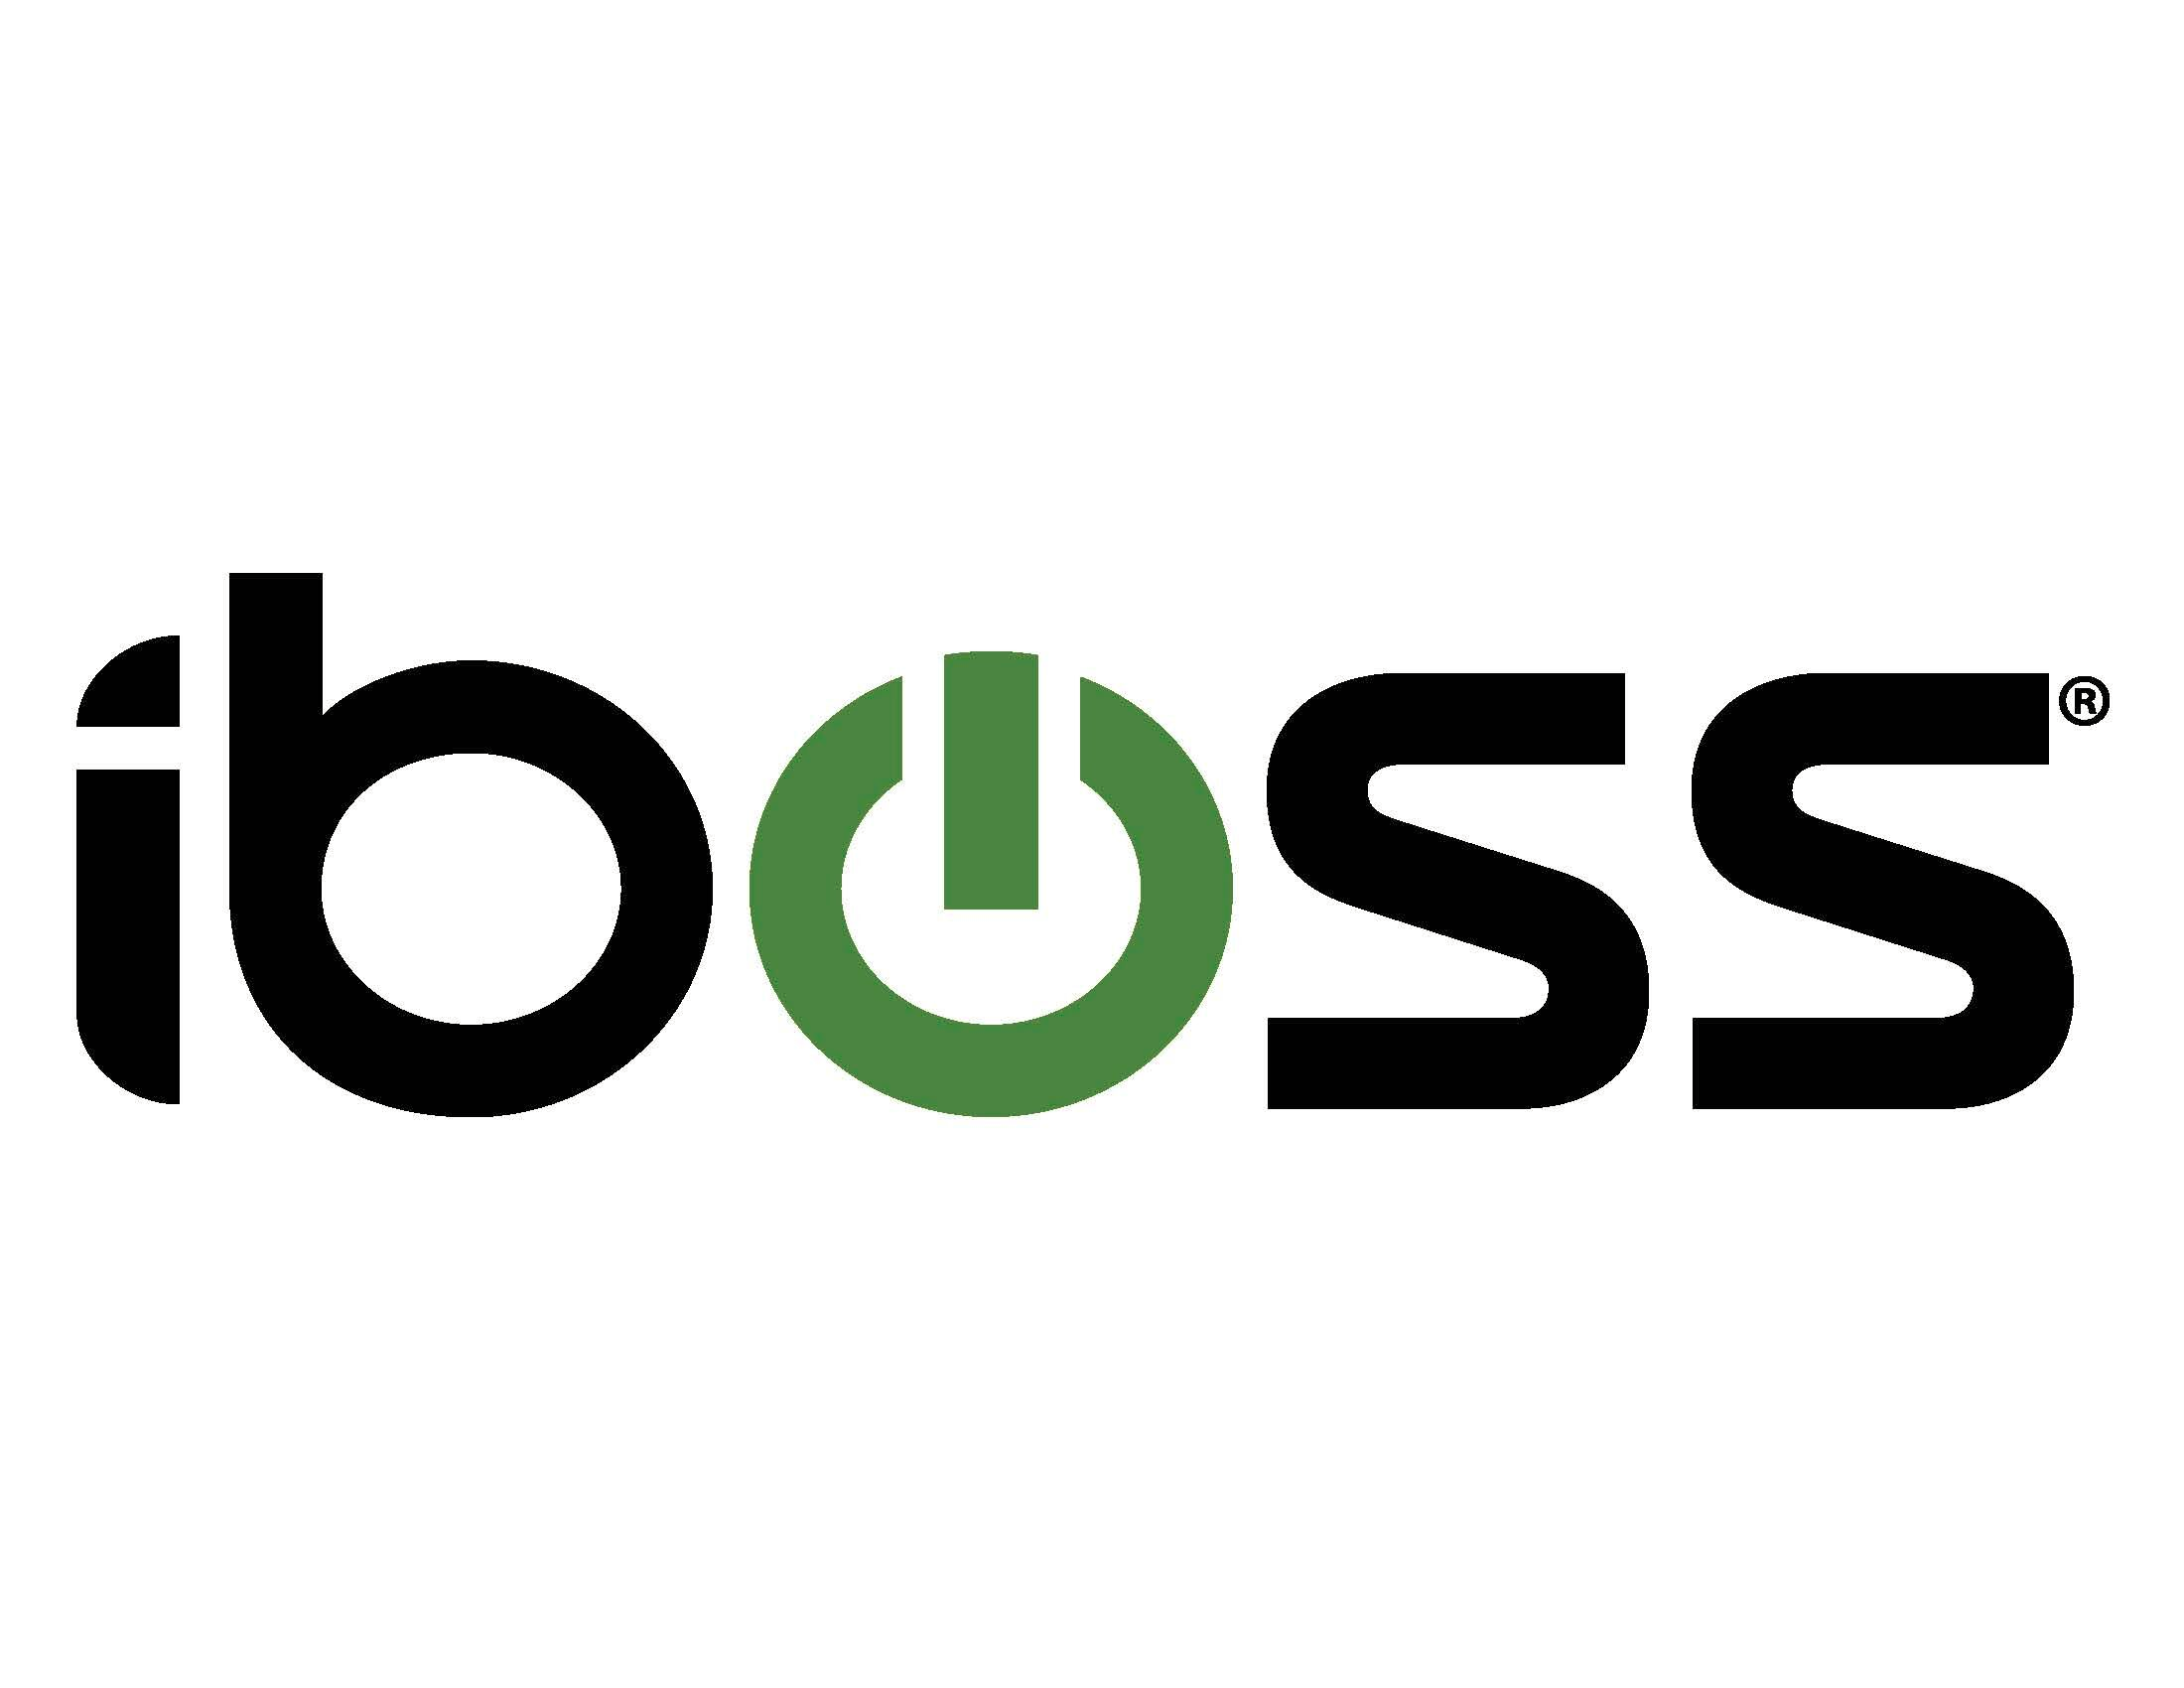 iboss, Monday, July 22, 2019, Press release picture